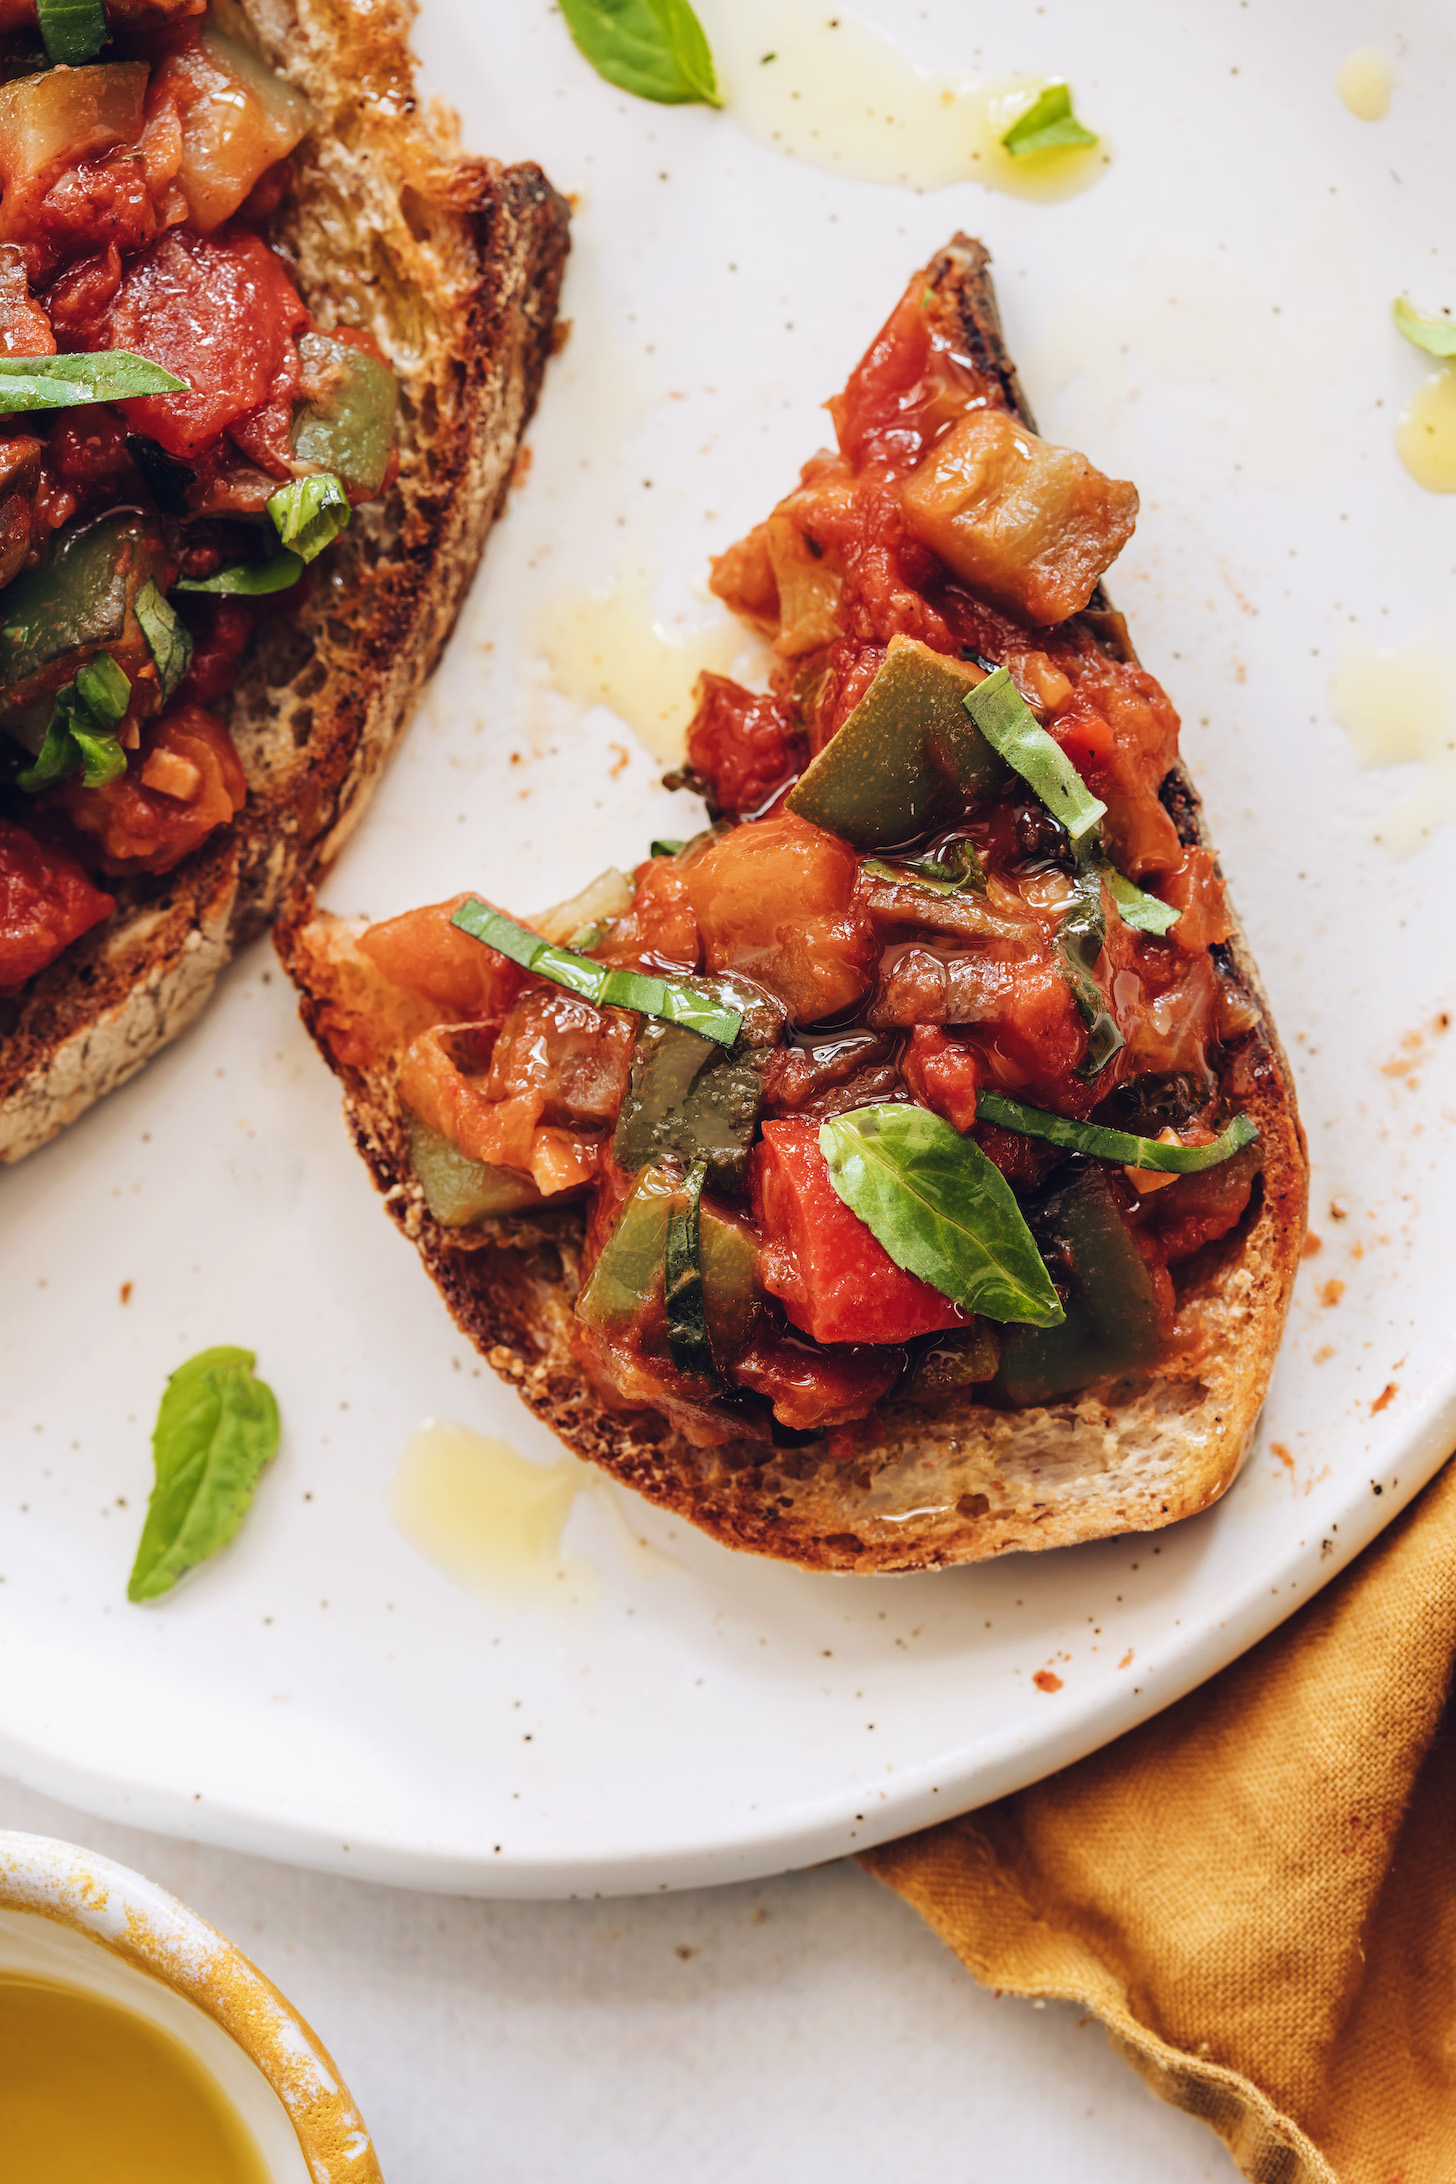 Slices of bread topped with ratatouille